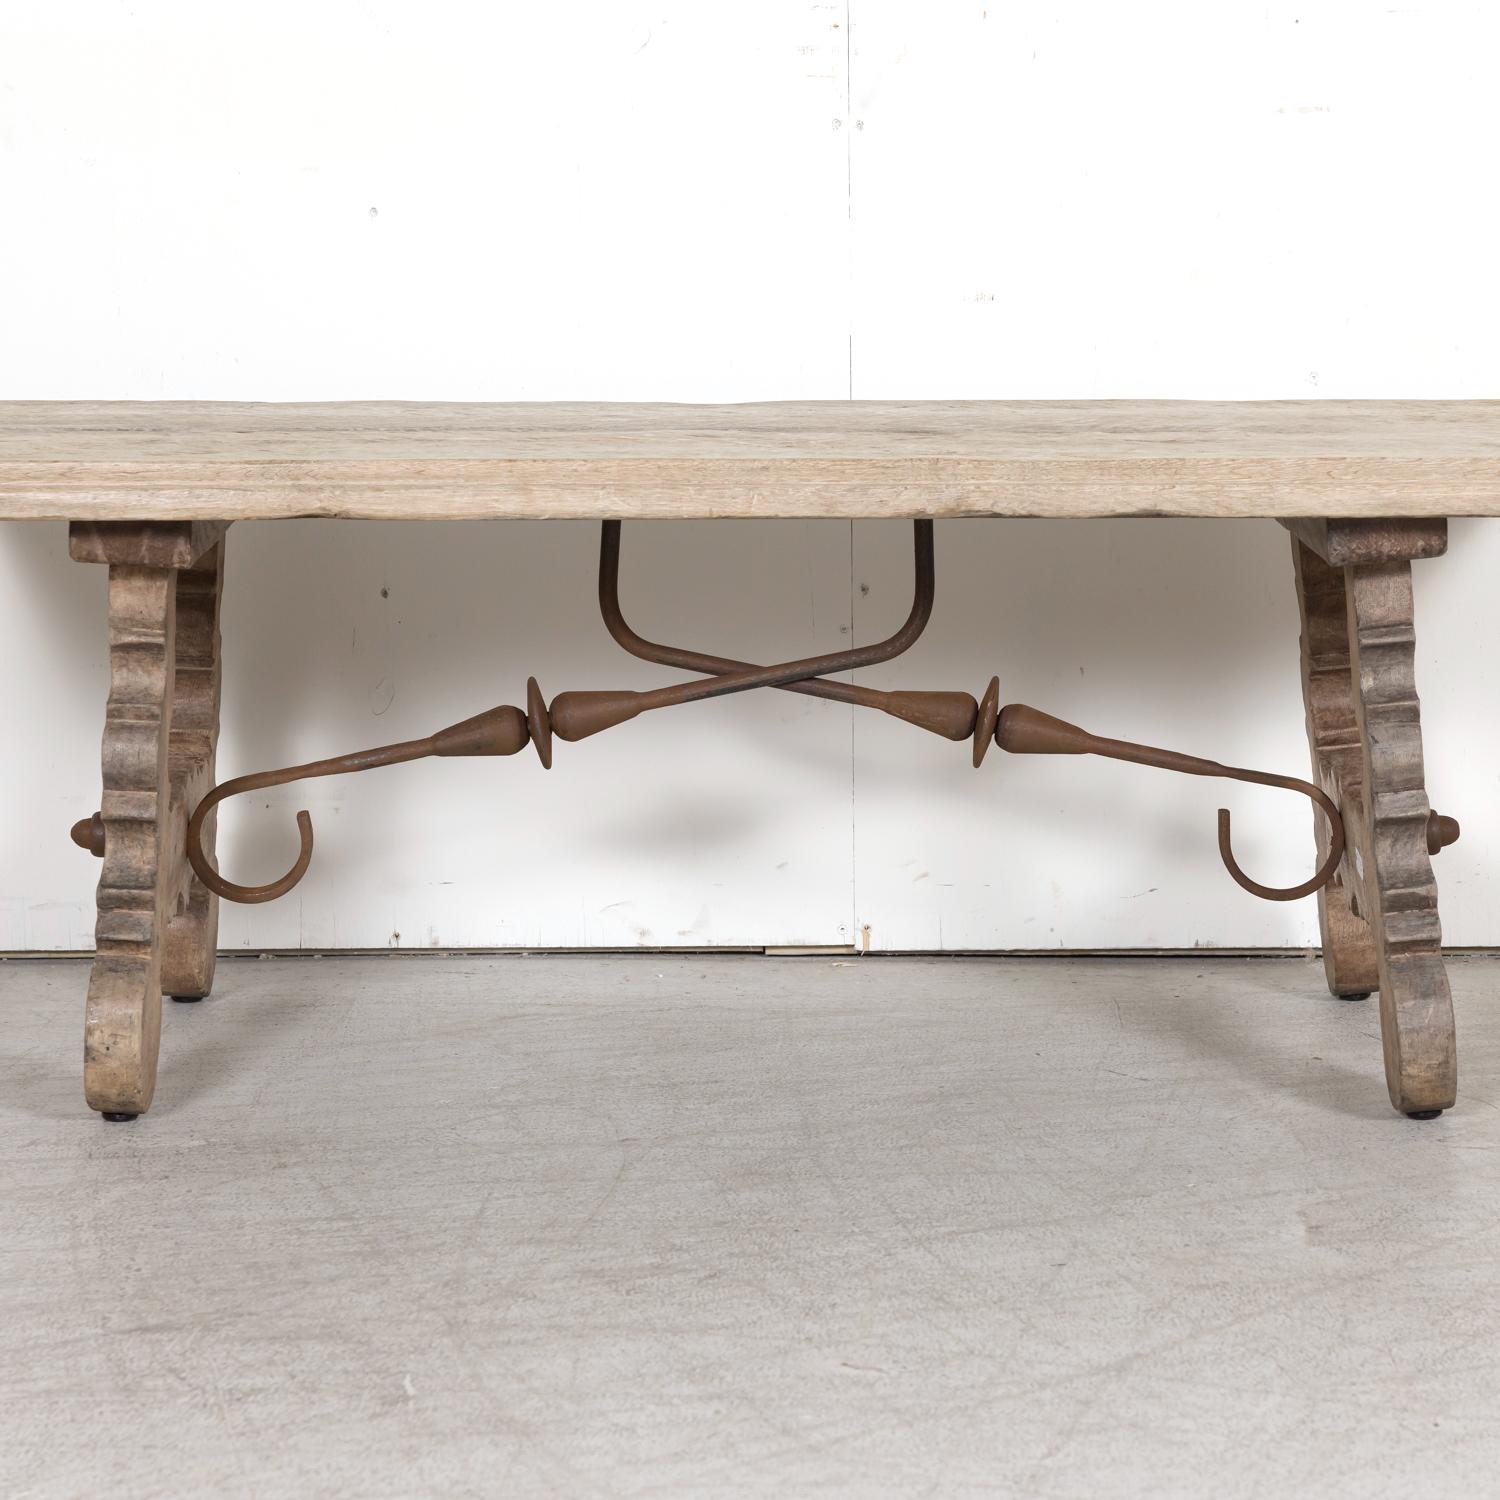 19th Century Spanish Baroque Style Bleached Oak Coffee Table with Iron Stretcher For Sale 5